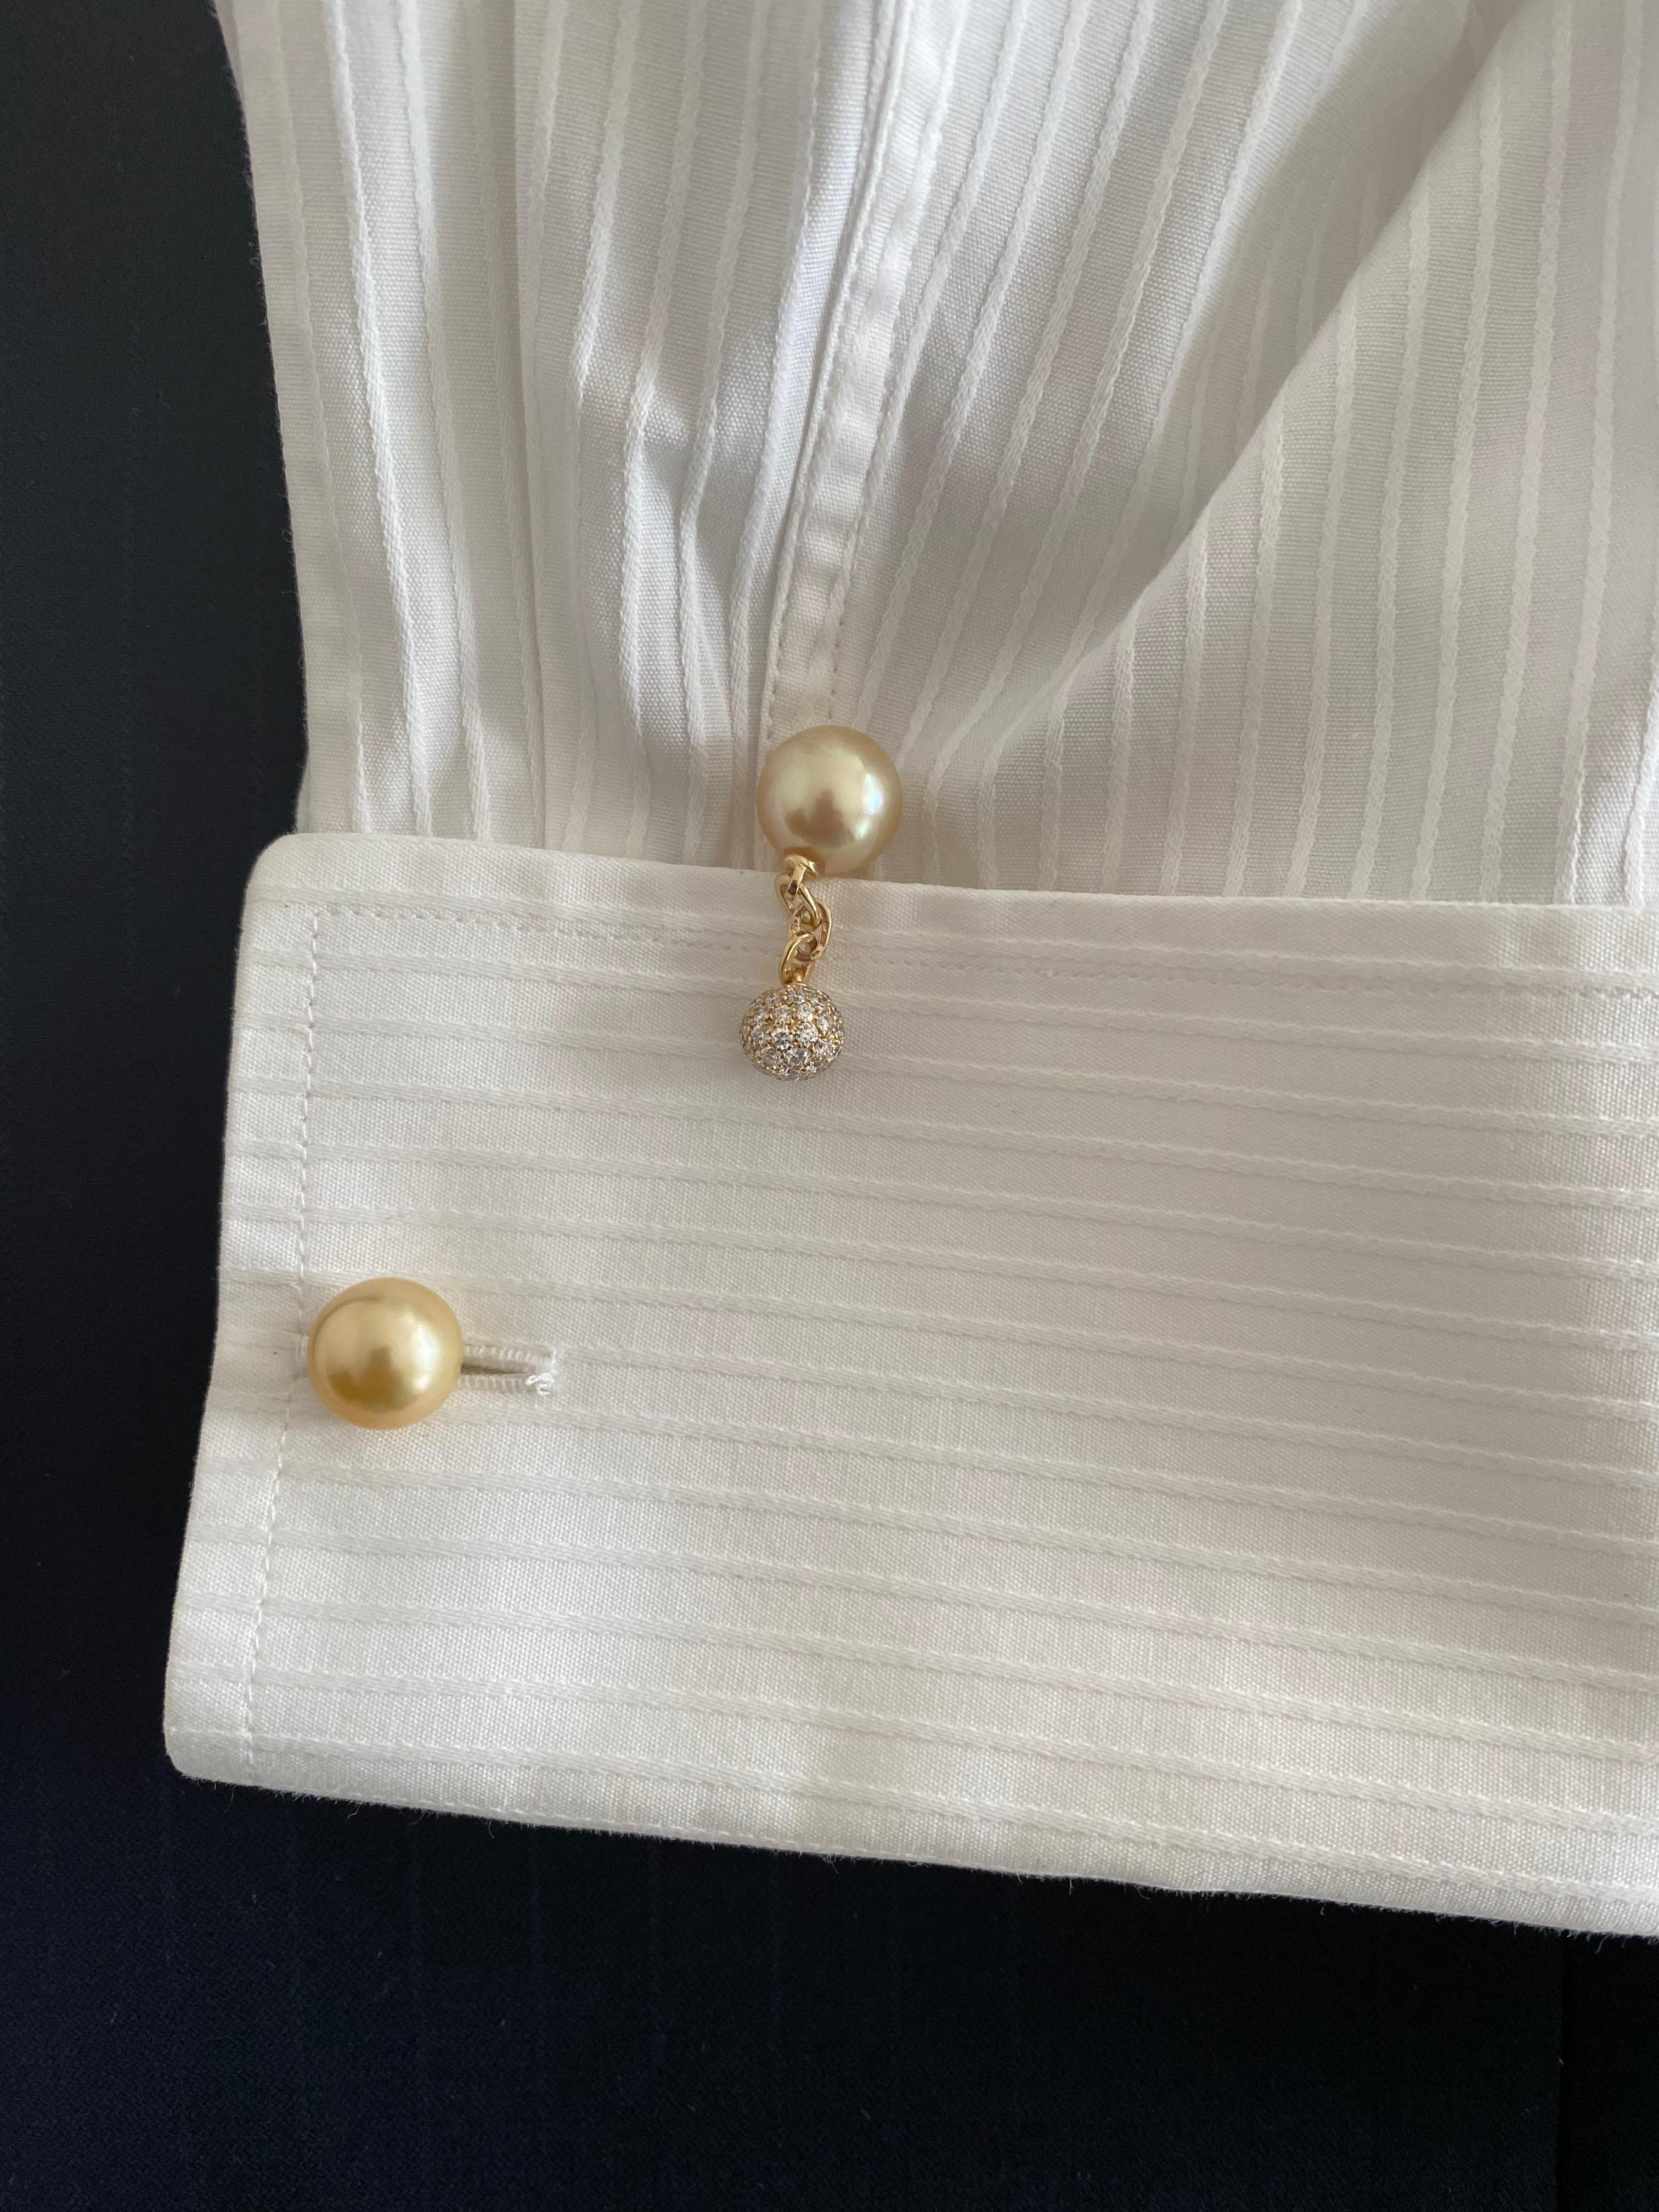 White Diamond South Sea Pearl 18 Karat Gold Cufflinks Made in Italy For Sale 5